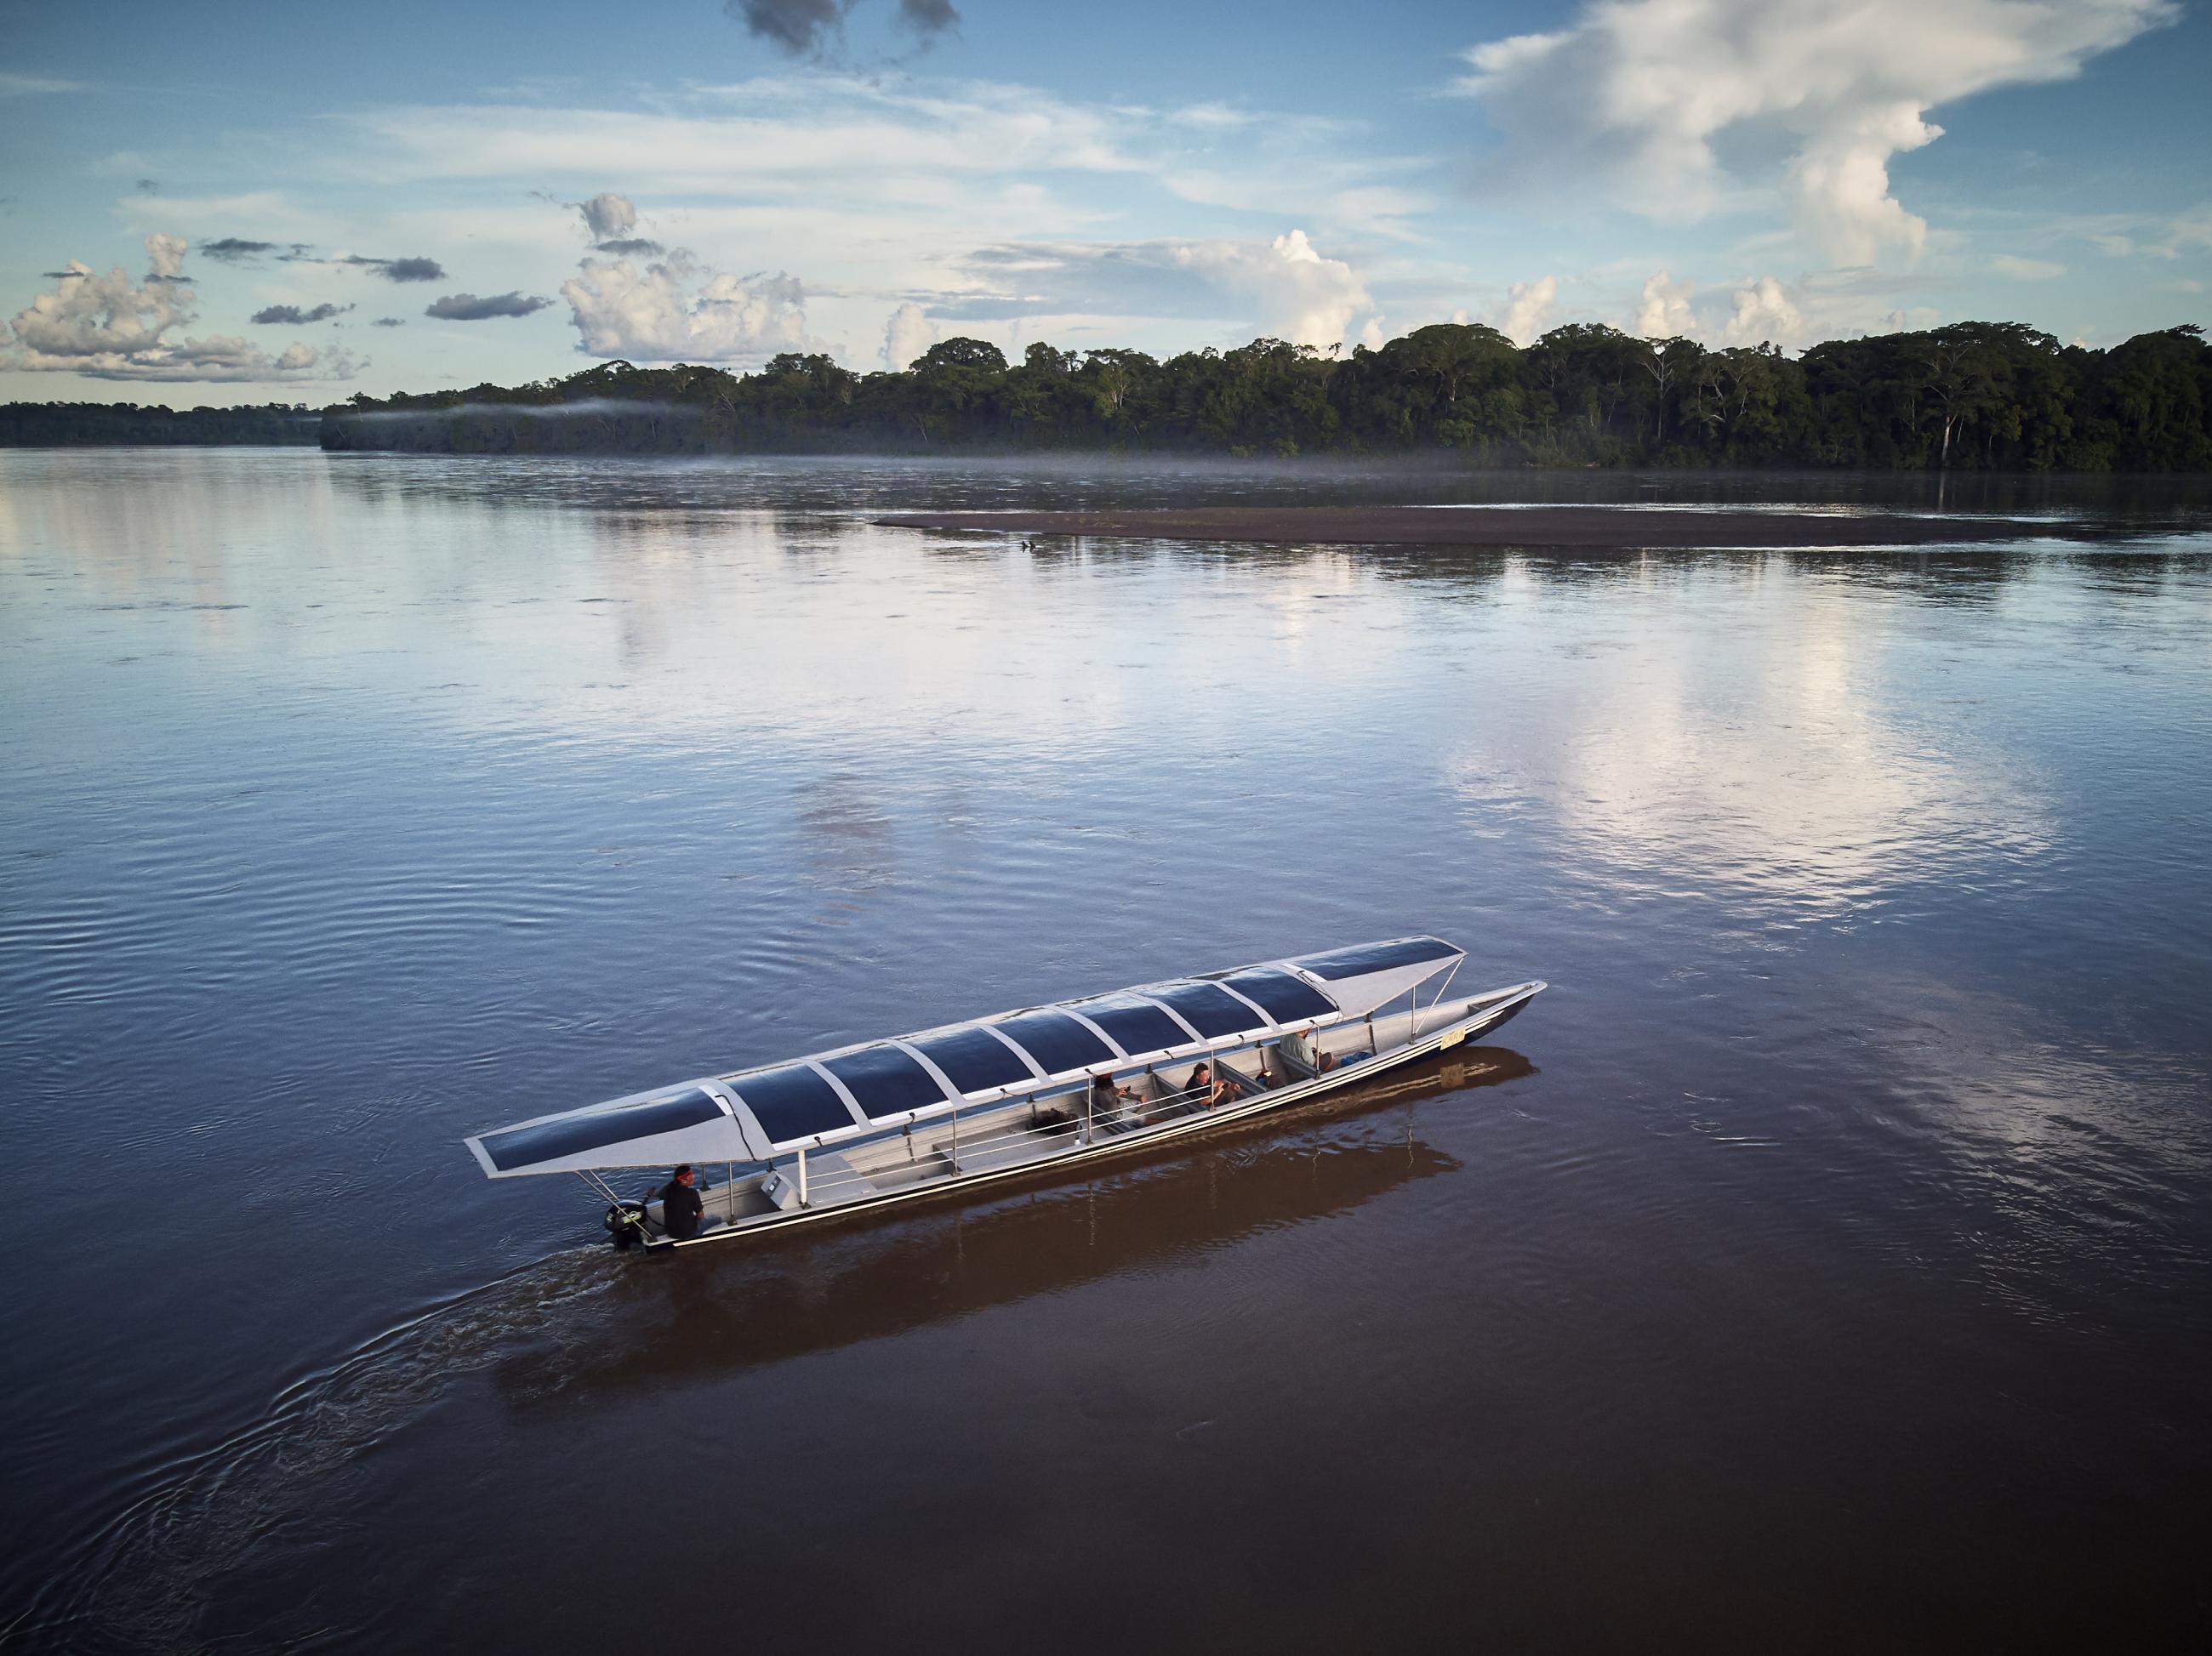 Sunkirum, a solar-powered canoe, sails on the Pastaza River in the Amazon in Ecuador, where the Achuar Indigenous people have lived for thousands of years